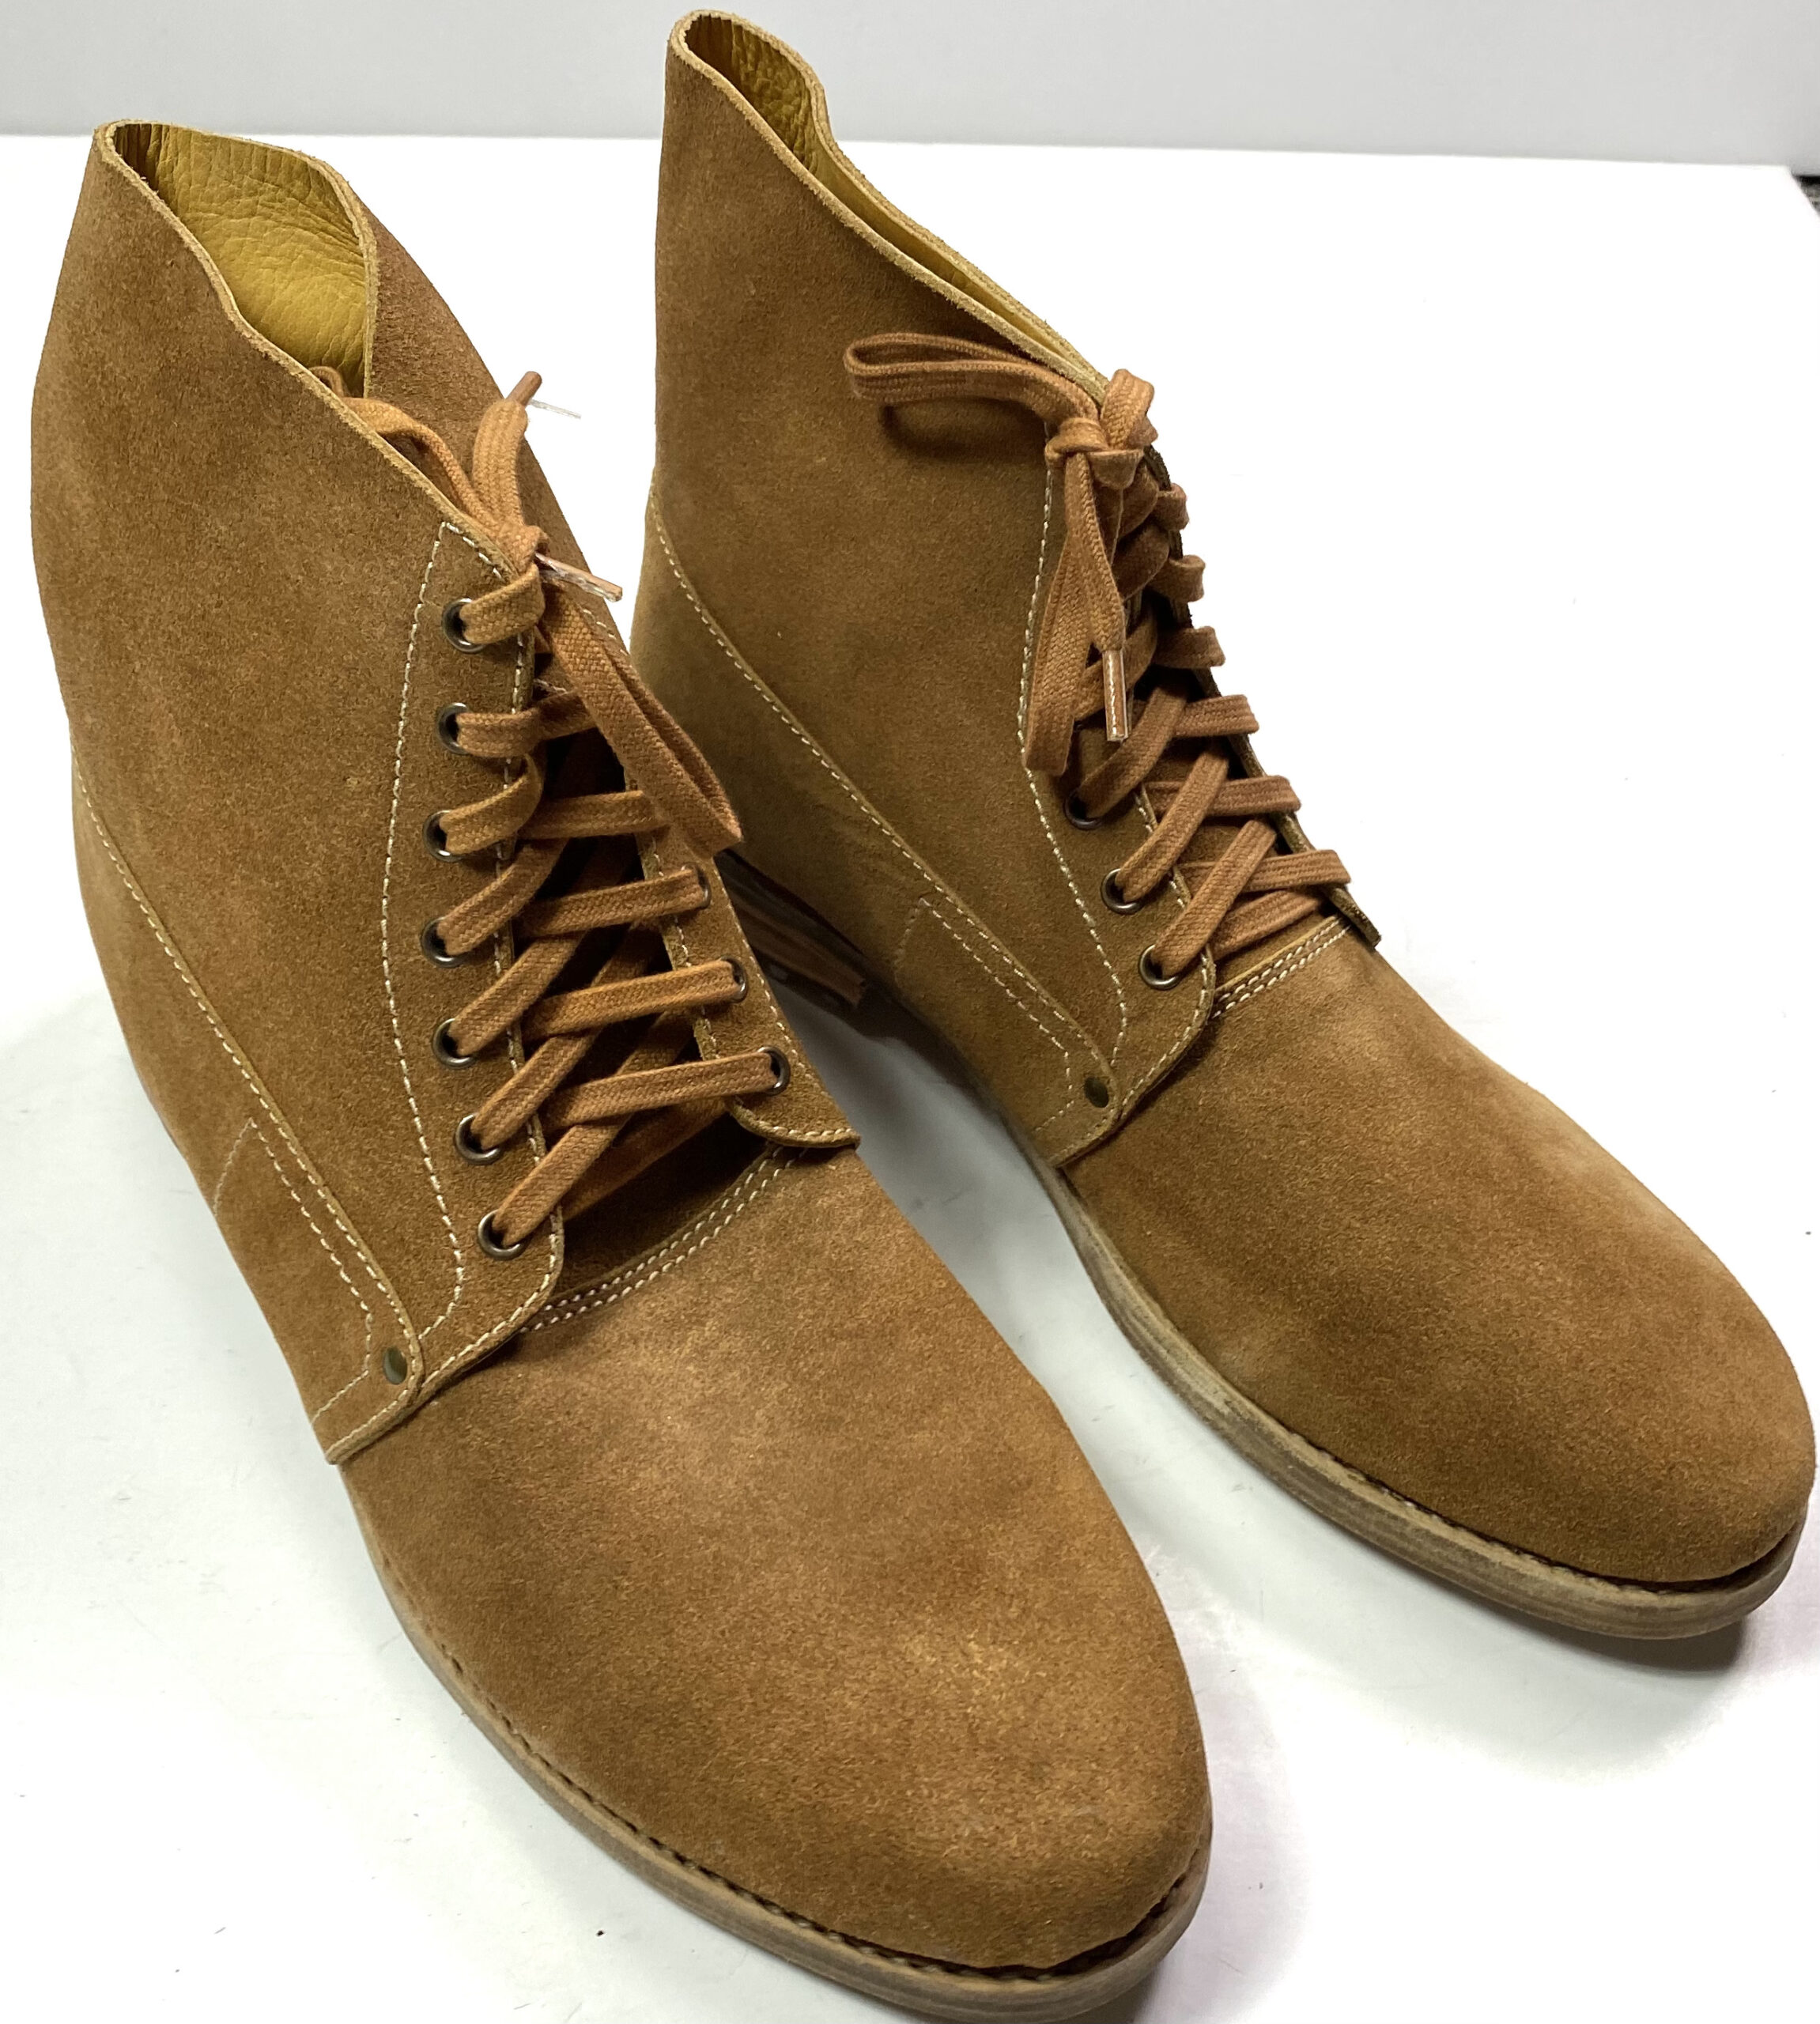 M1918 PERSHING TRENCH BOOTS | Man The Line